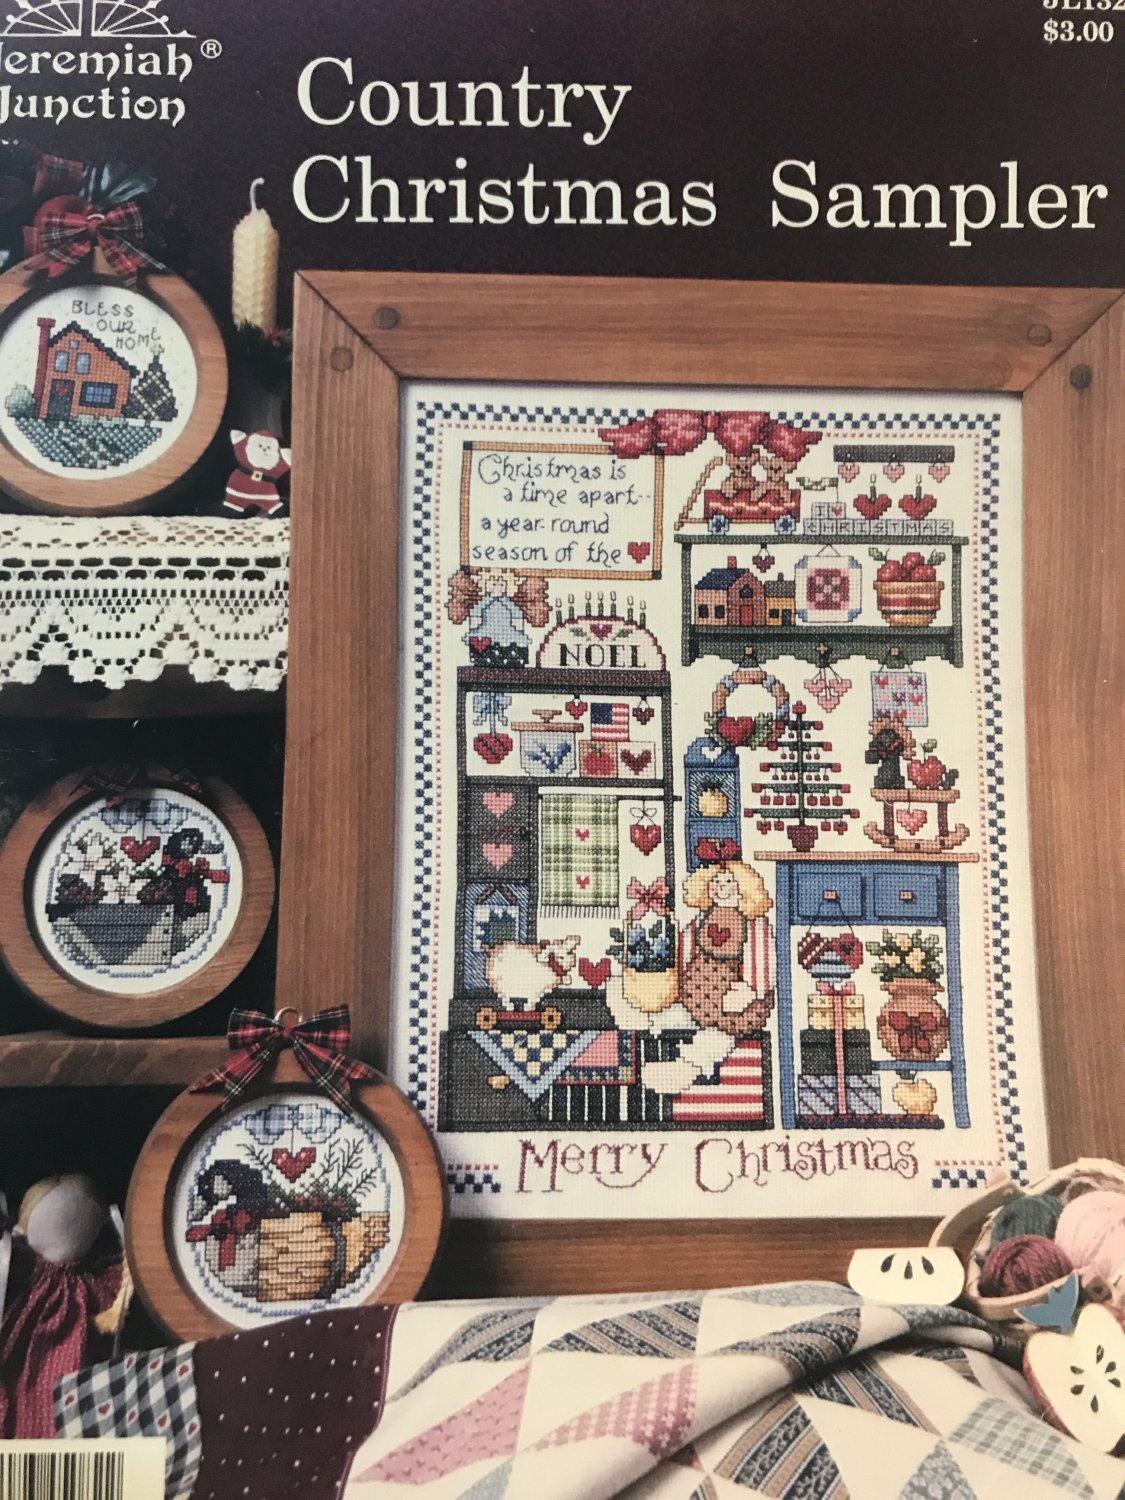 Country Christmas Sampler Cross Stitch Chart Jeremiah Junction JL132